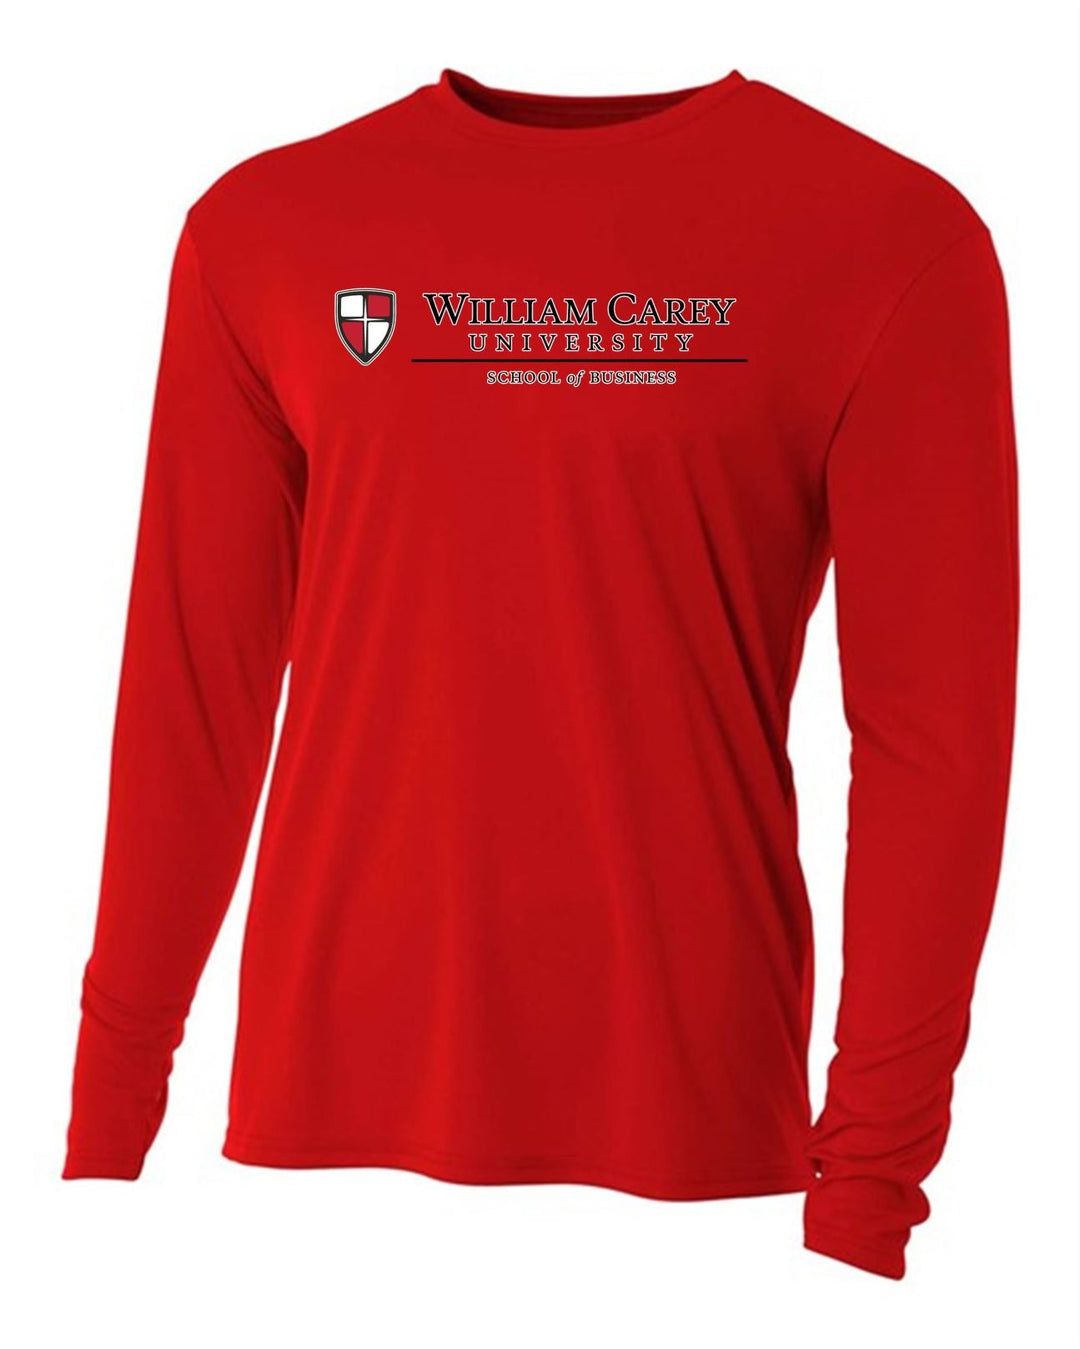 WCU School Of Business Youth Long-Sleeve Performance Shirt WCU Business Red Youth Small - Third Coast Soccer